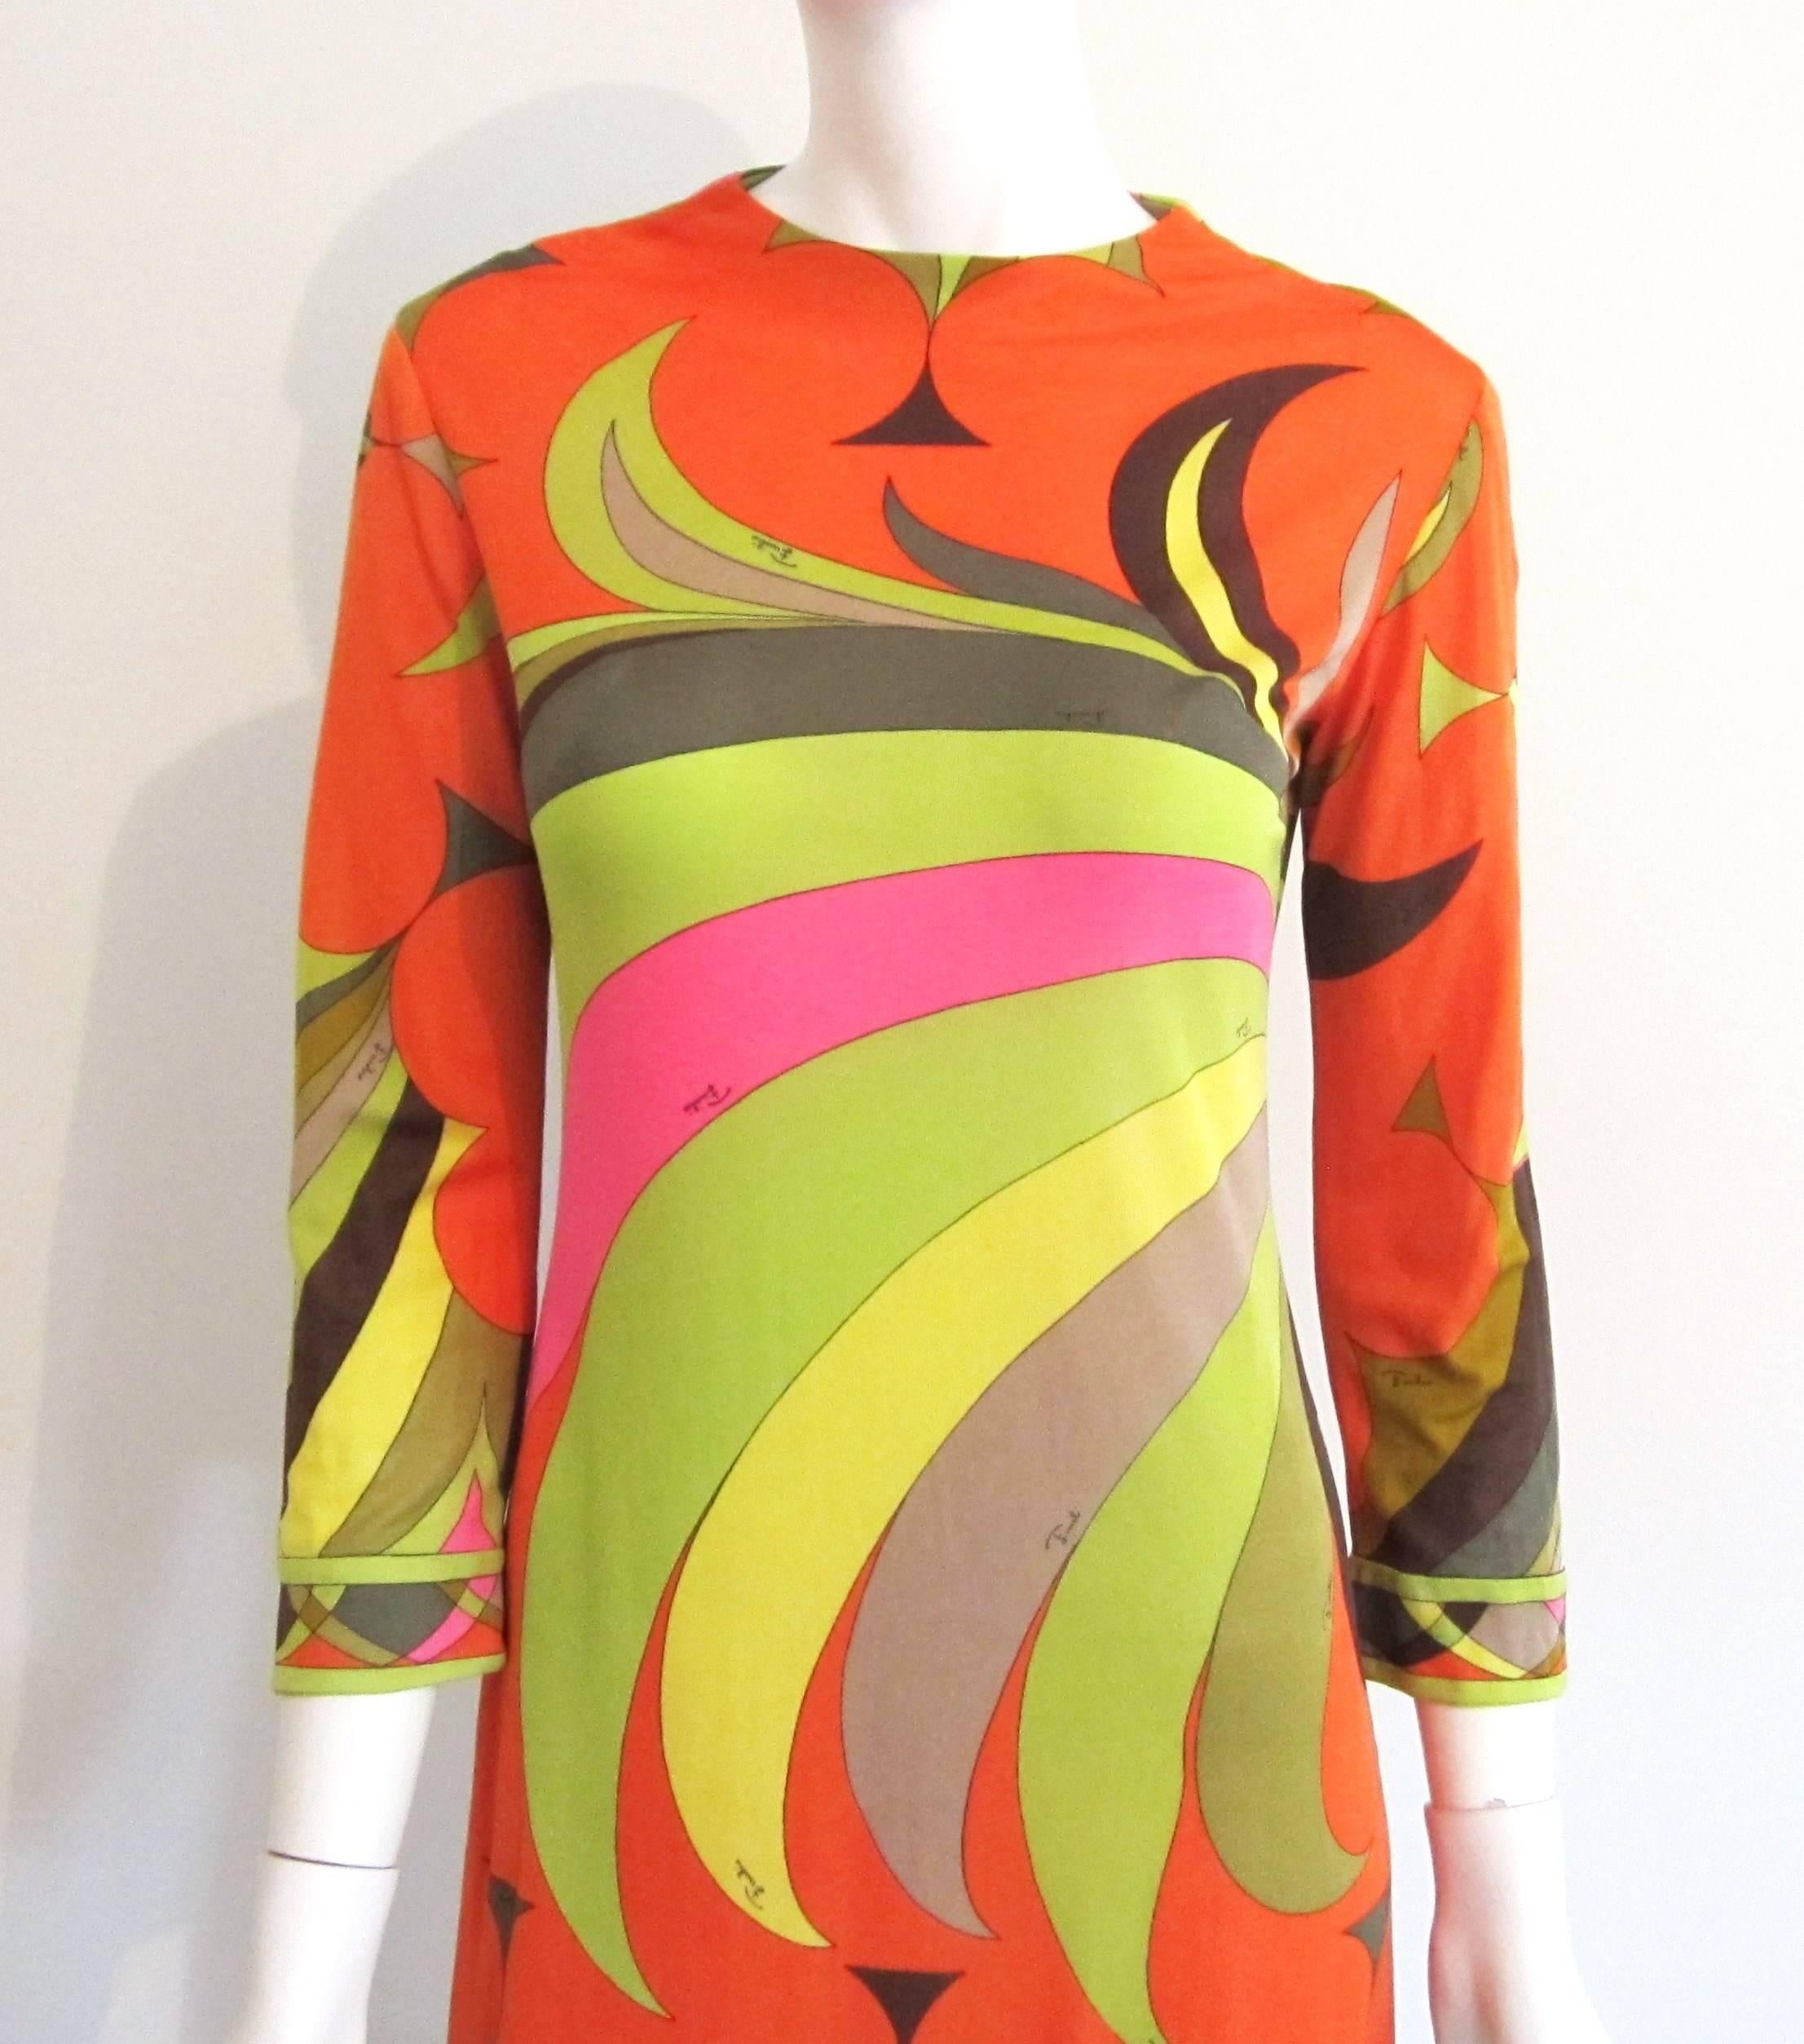 Stunning colors on this Fabulous Emilio Pucci Silk Dress. Vibrant Orange, green, yellow, brown and pink. Zippered back. Just stunning! Labeled a size 10, however vintage sizing does NOT equal today's sizing. Please refer to the measurements. This